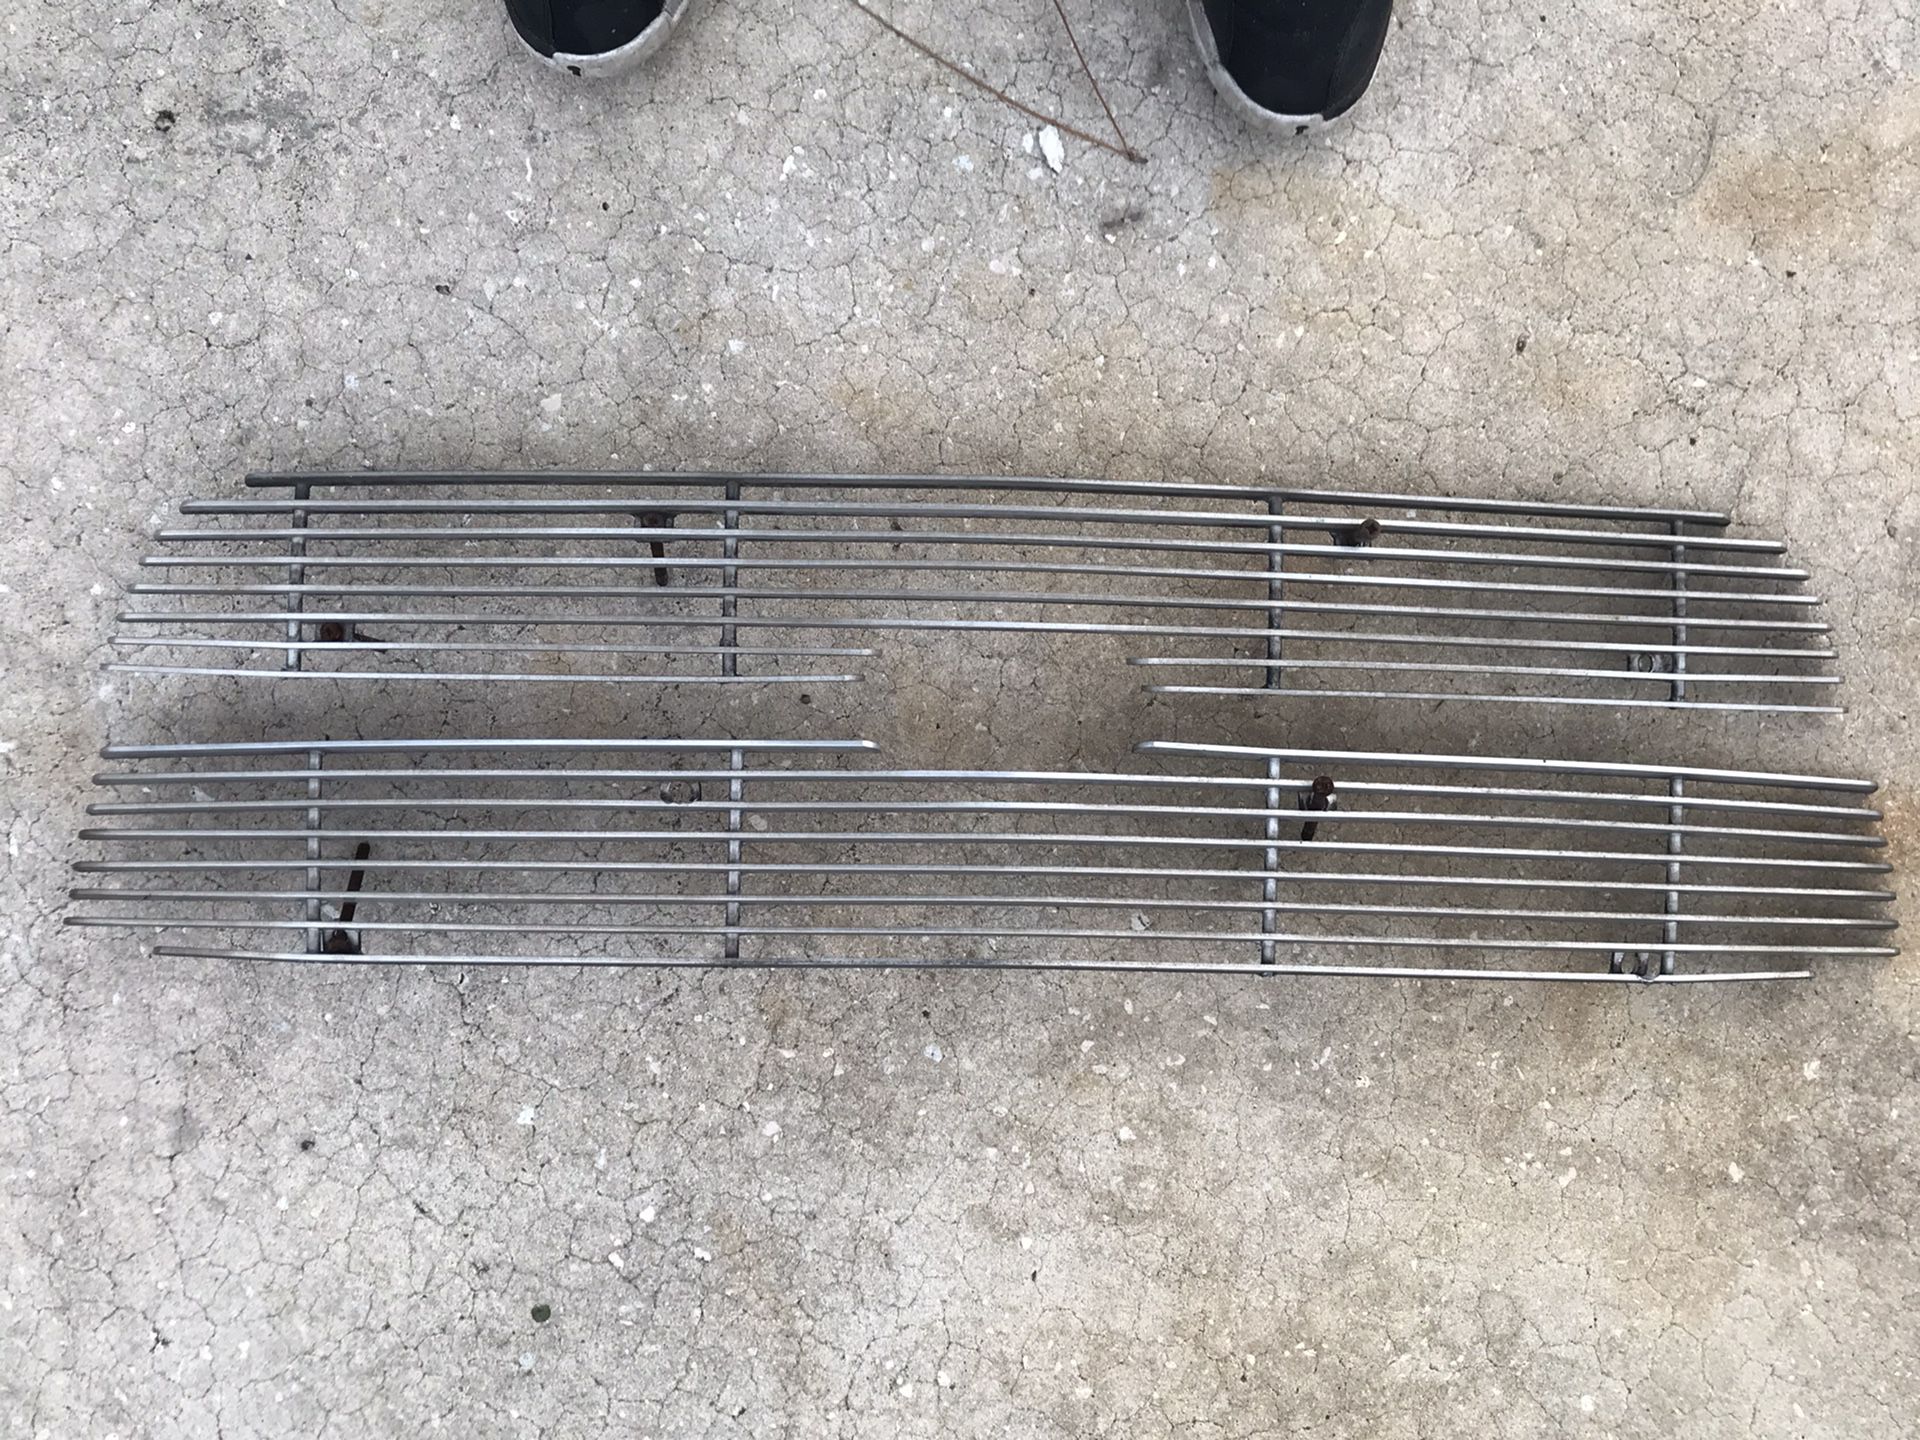 2004 Silverado 1500 stainless steel grill inserts